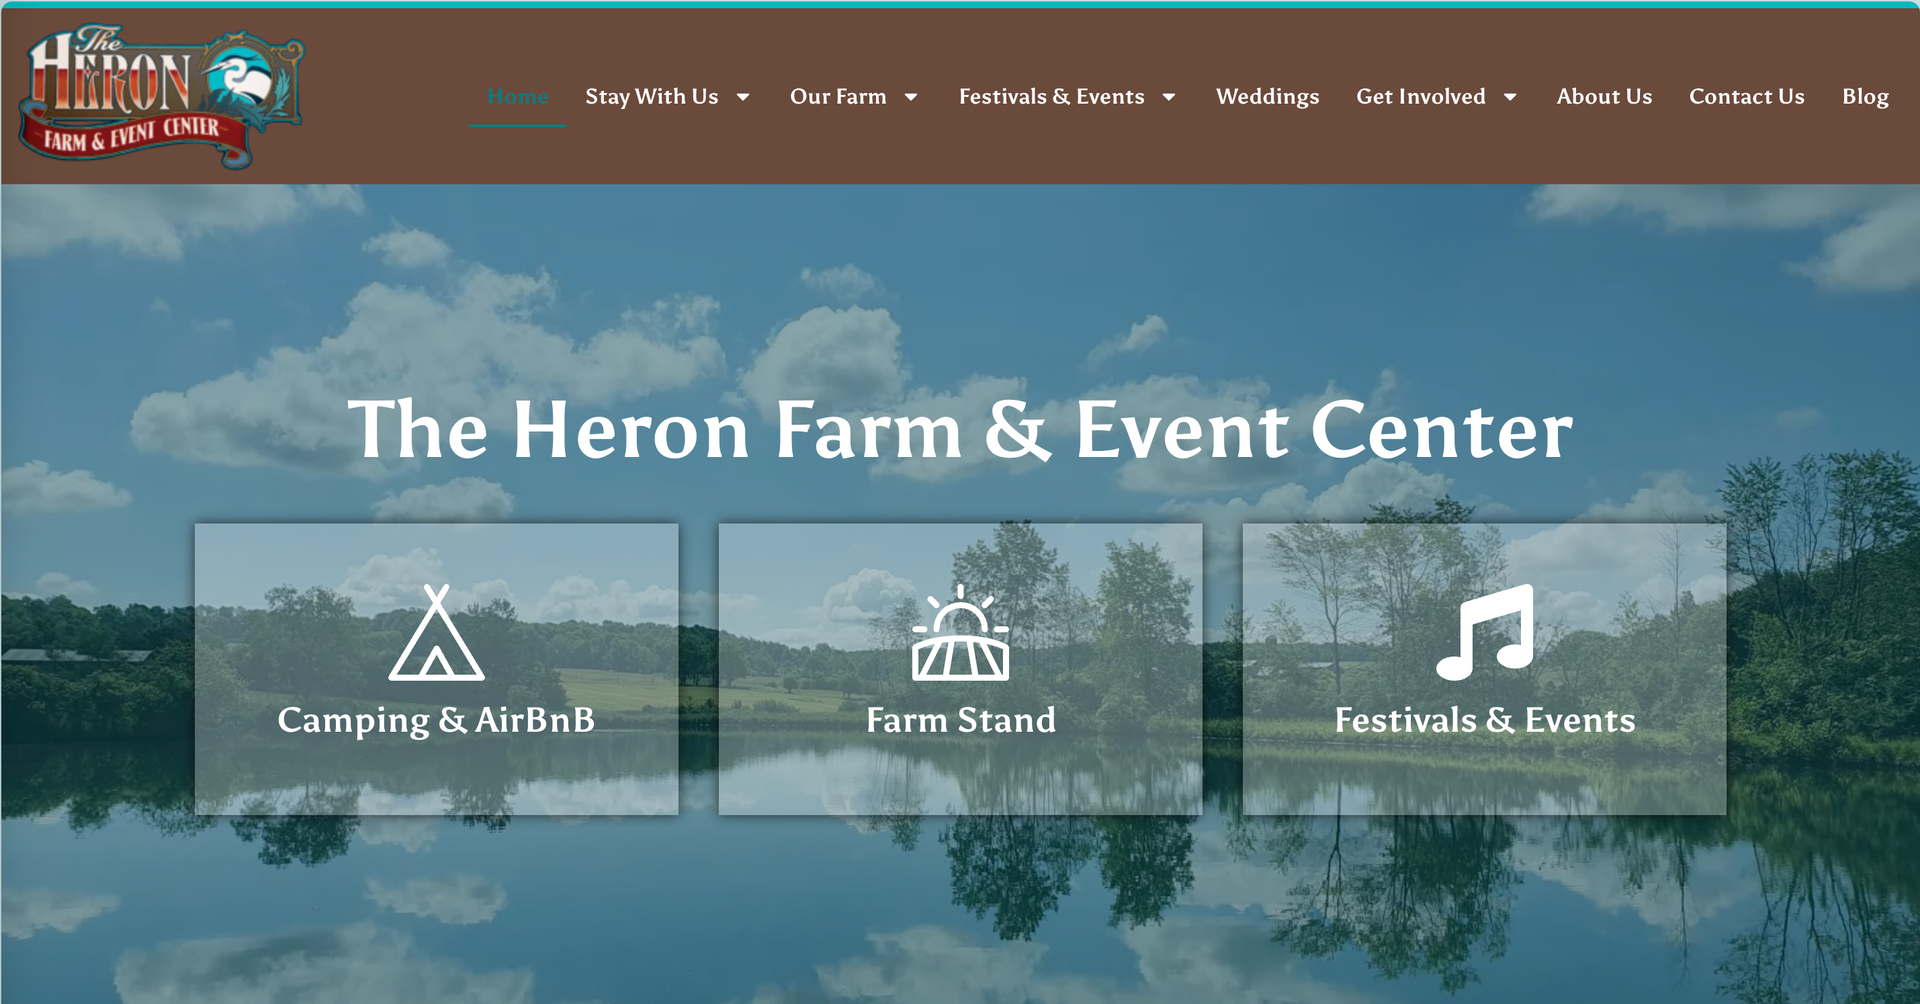 The Heron Website, another design by Great Things LLC